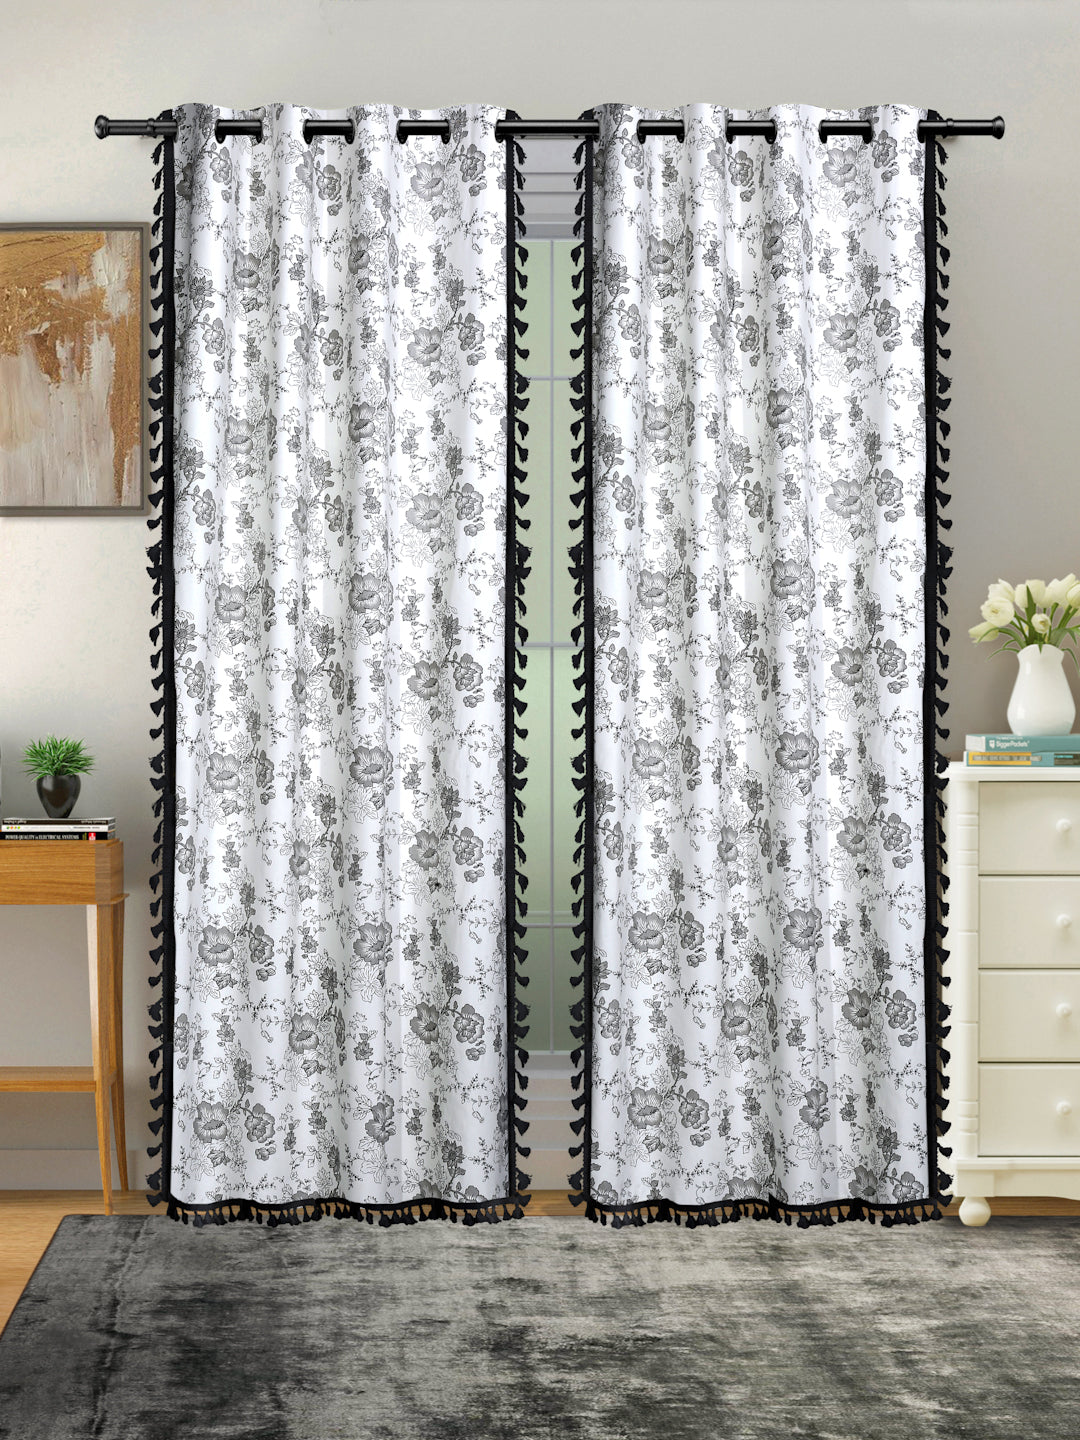 Cotton Printed Boho Light Filtering Long Door Curtain with Lace- Cream (Pack of 2)